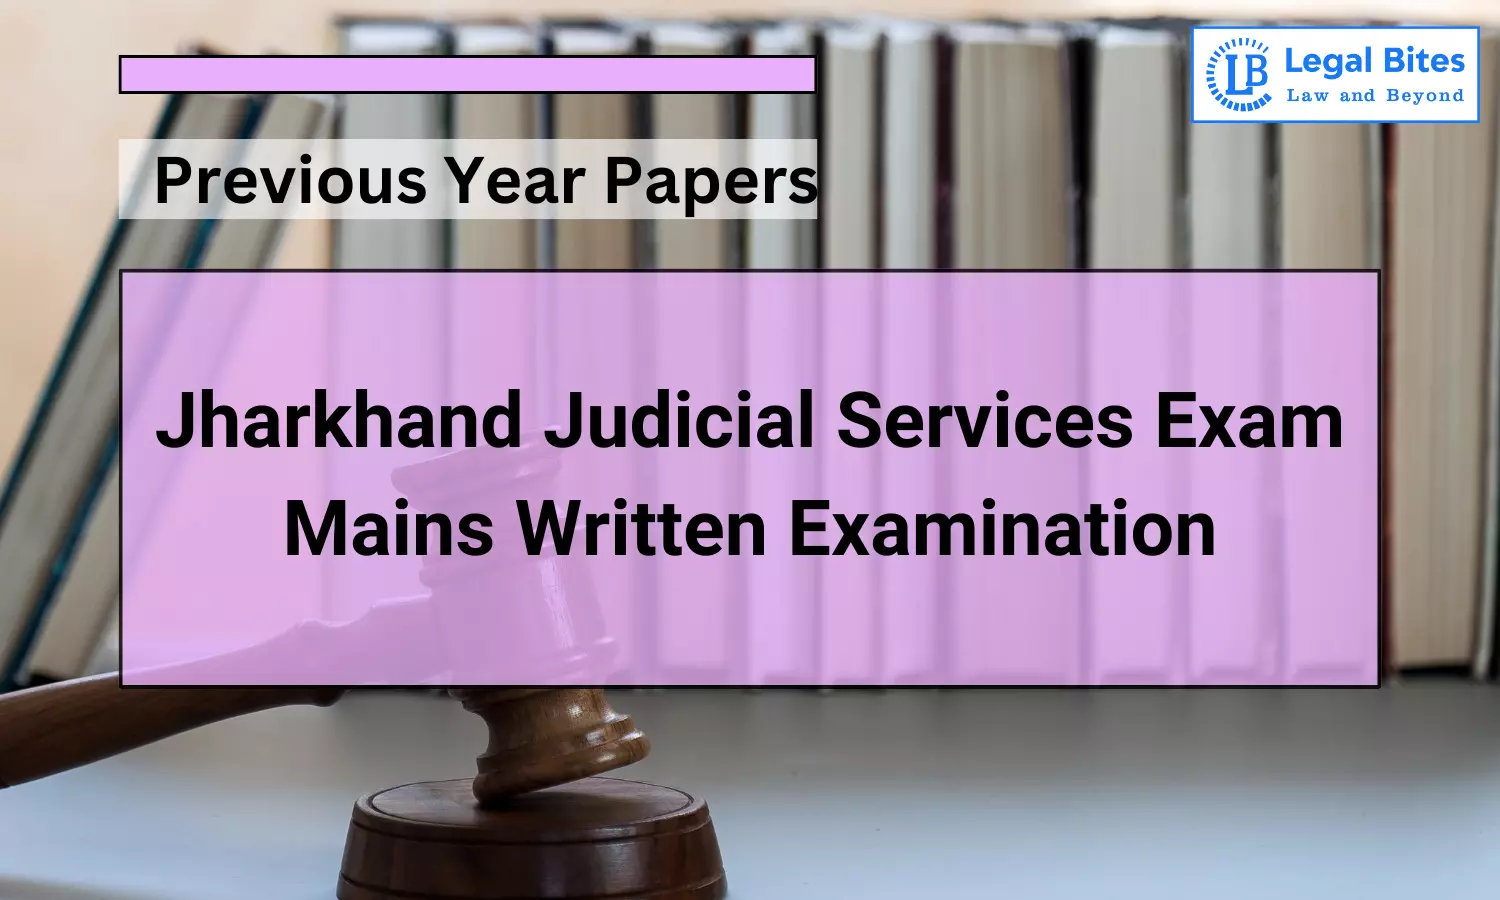 Jharkhand Judicial Services Exam Mains 2018 Previous Year Paper II | Transfer of Property Act, Contract Act, Sale of Goods Act, Negotiable Instruments Act, Arbitration and Conciliation Act